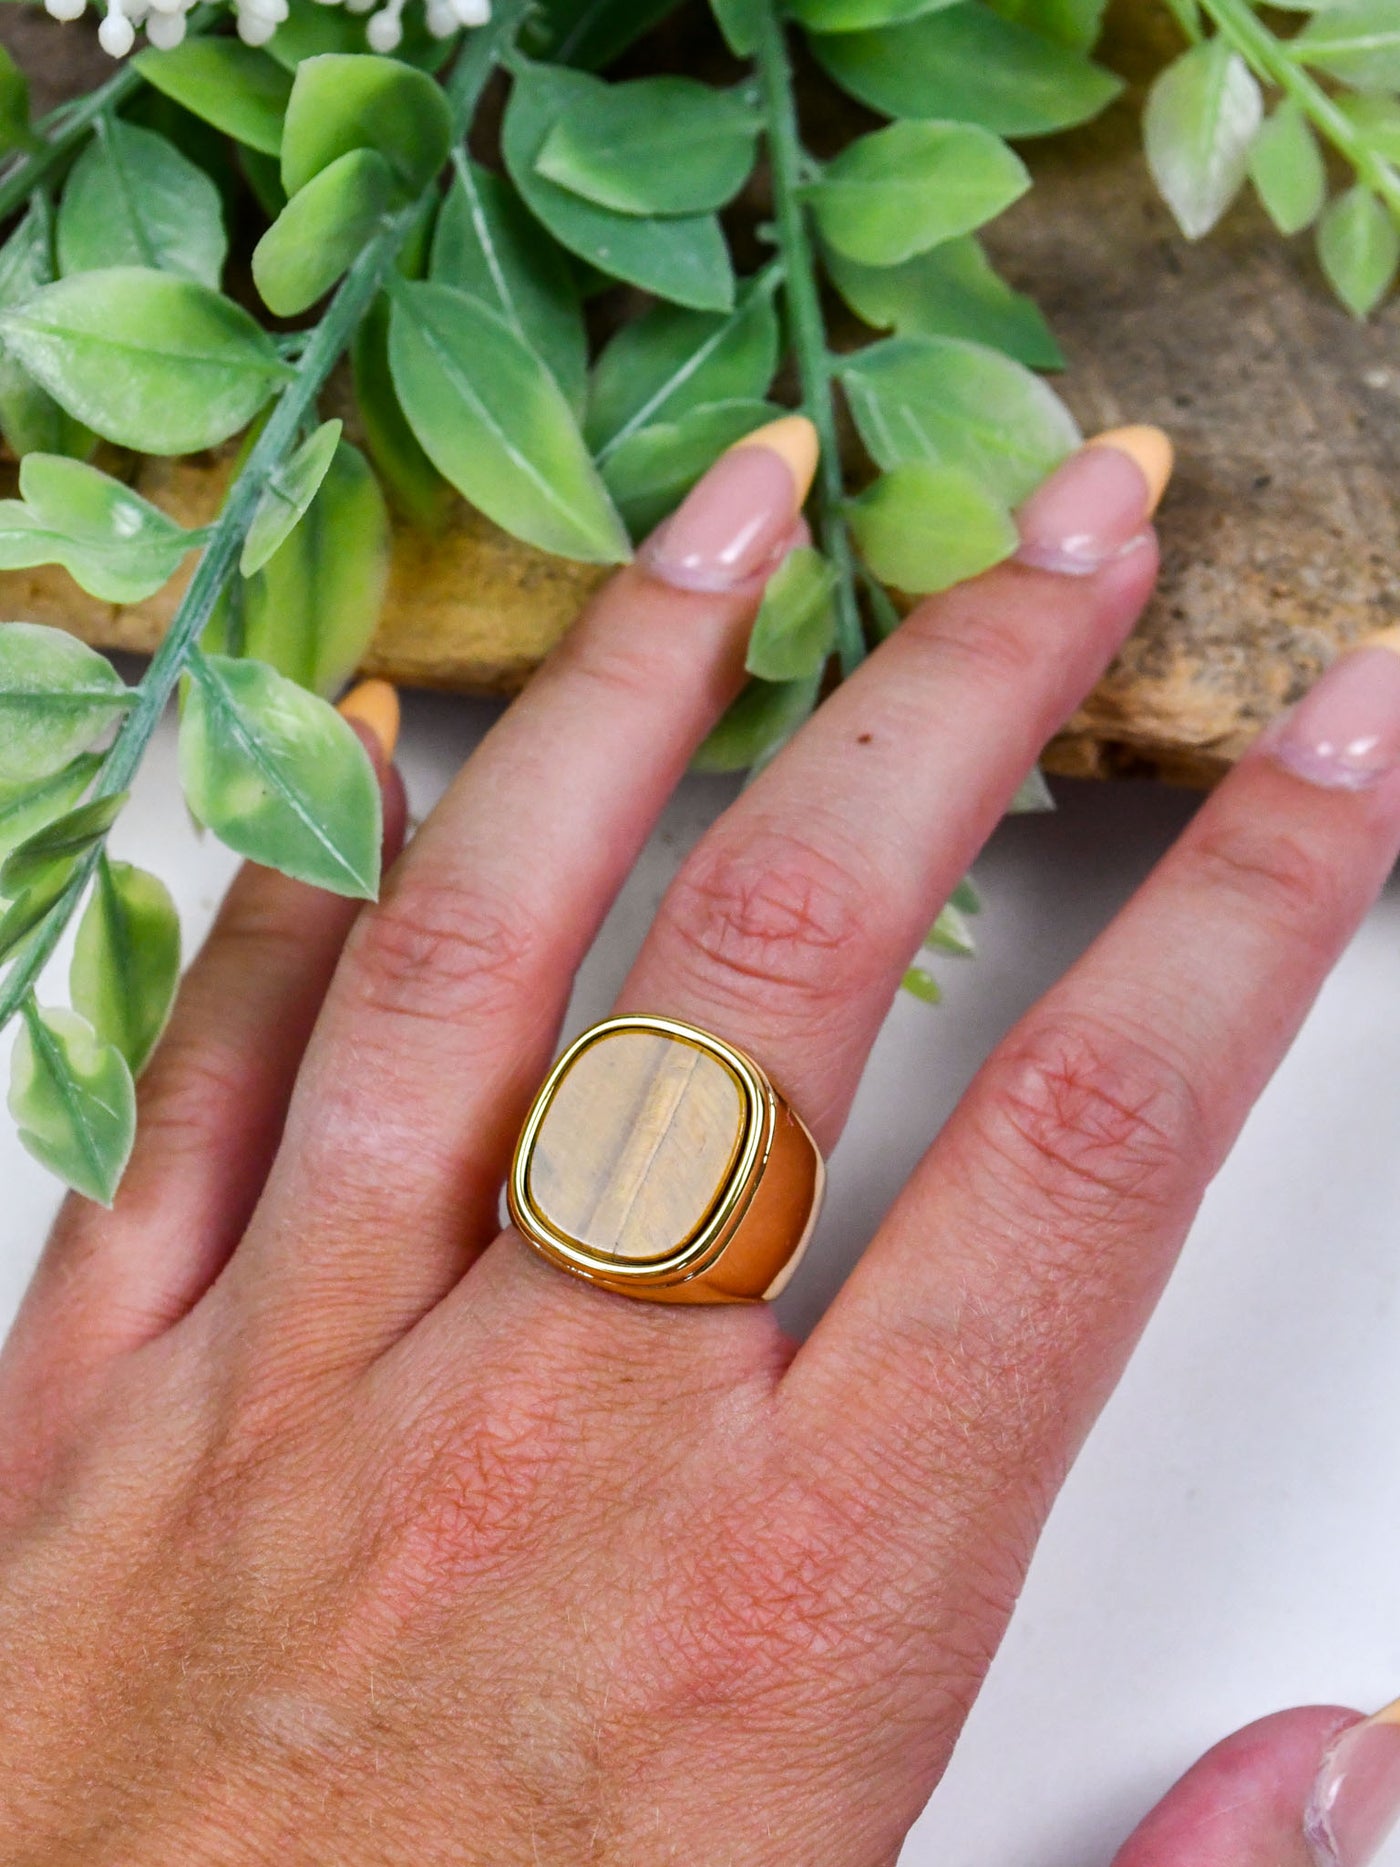 A gold ring with a brown wood-like stone center.